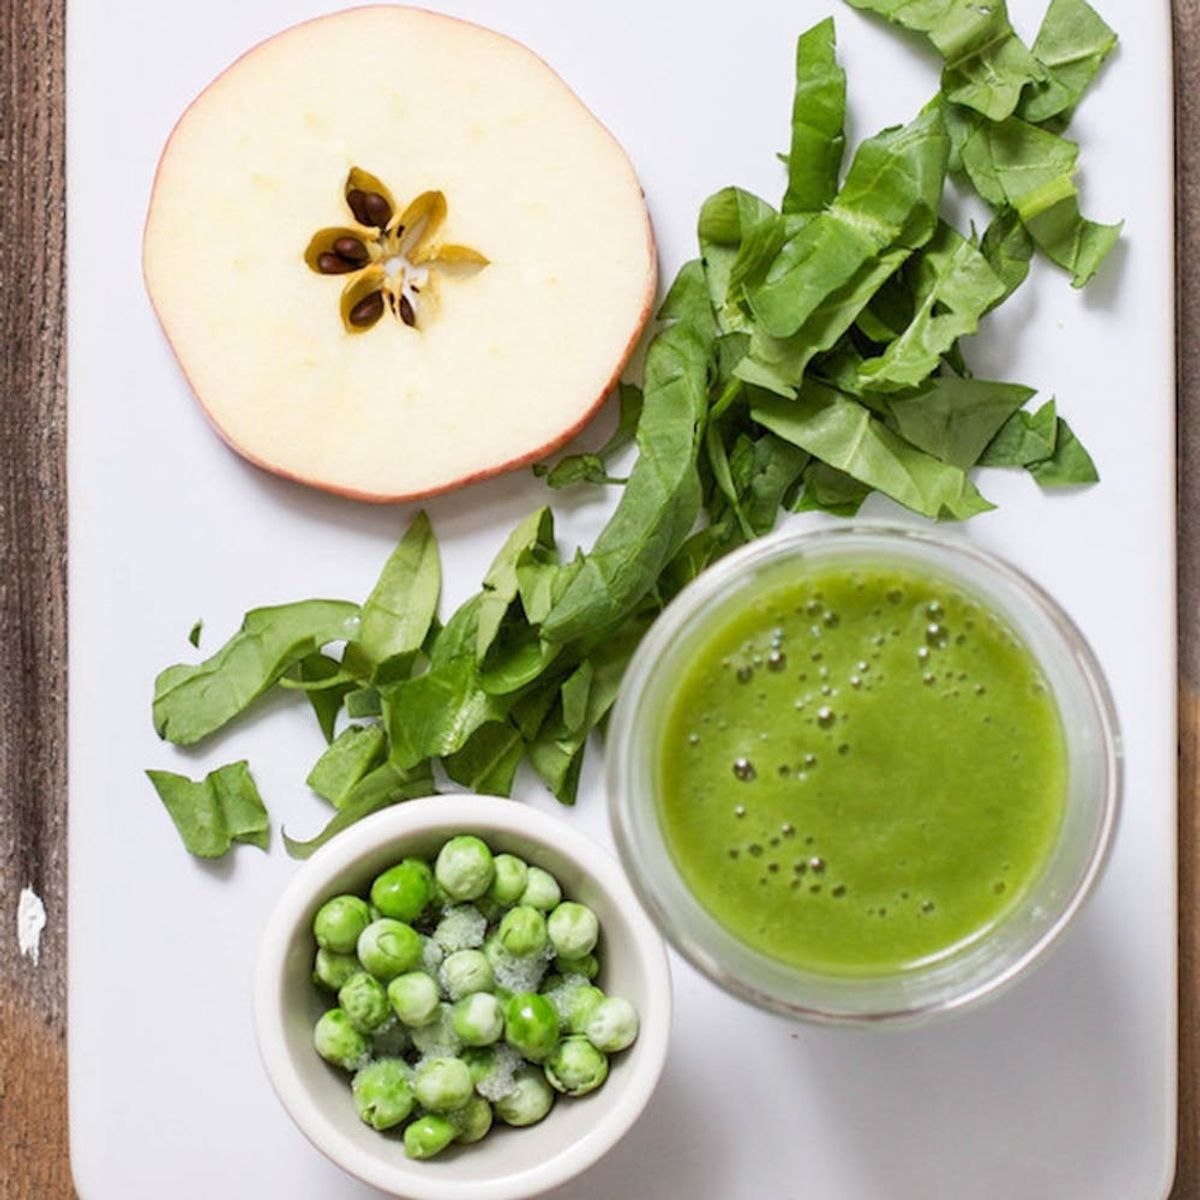 11 Homemade Baby Food Recipes That Are Actually Super Easy